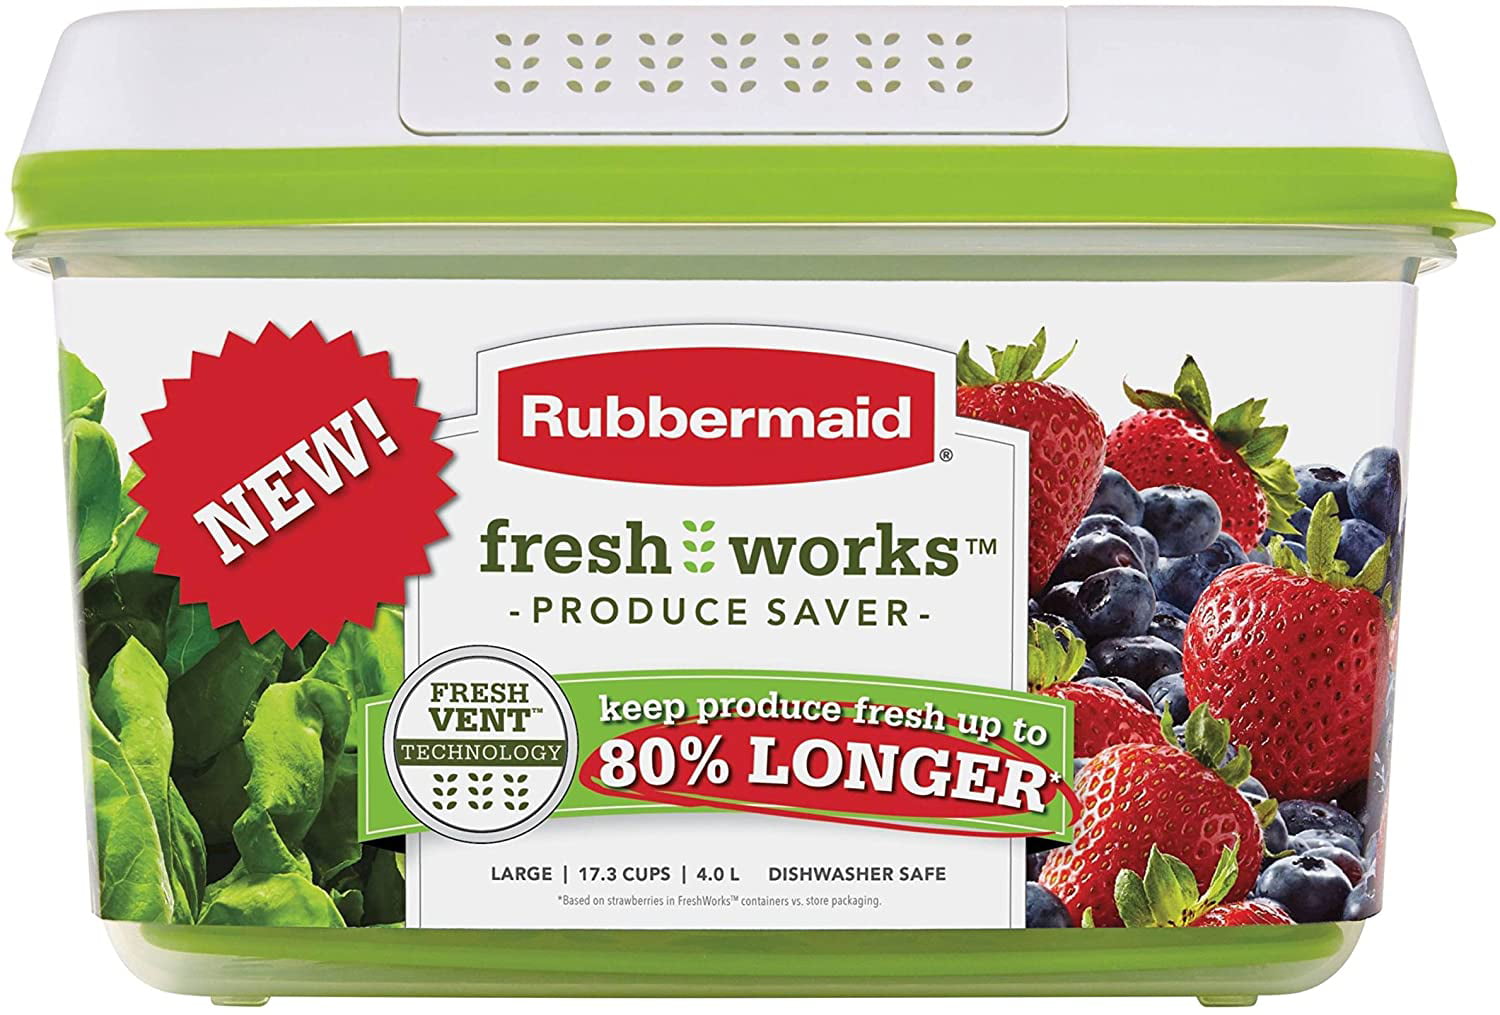 Rubbermaid 17.3 Cup Freshworks Produce Saver Food Storage Container Large Dishwa